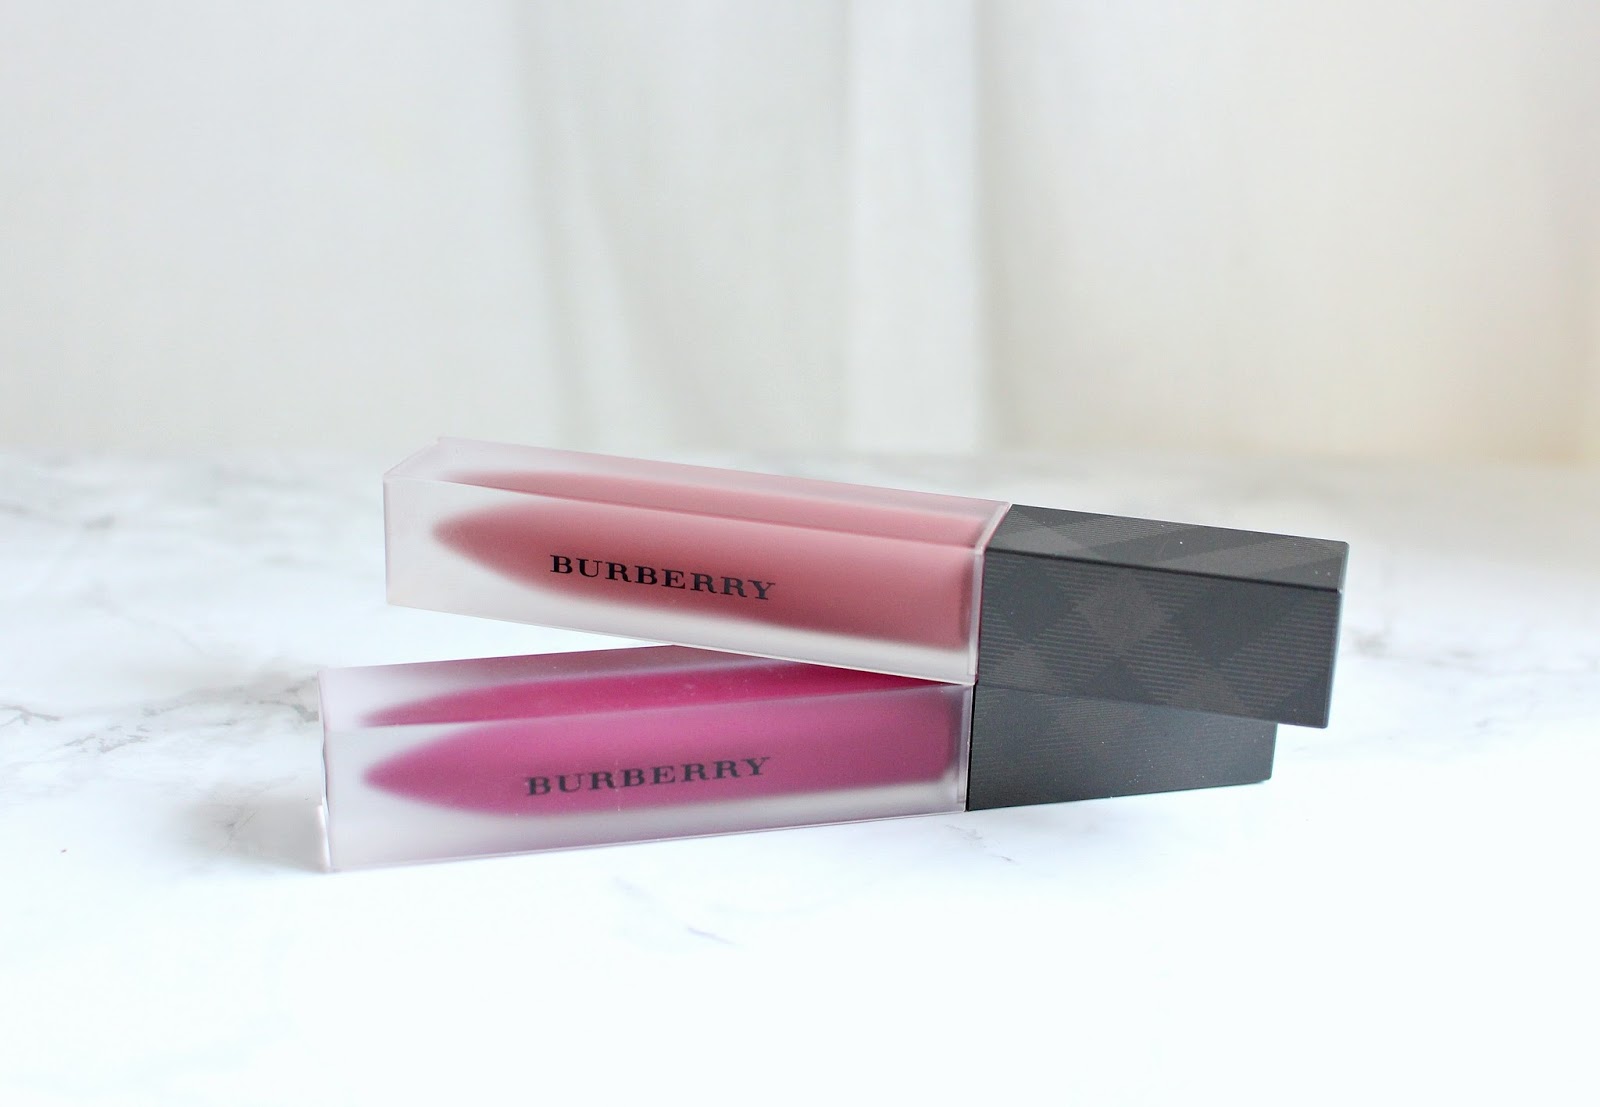 Samantha Jane: Burberry Liquid Lip Velvet Swatches and Review